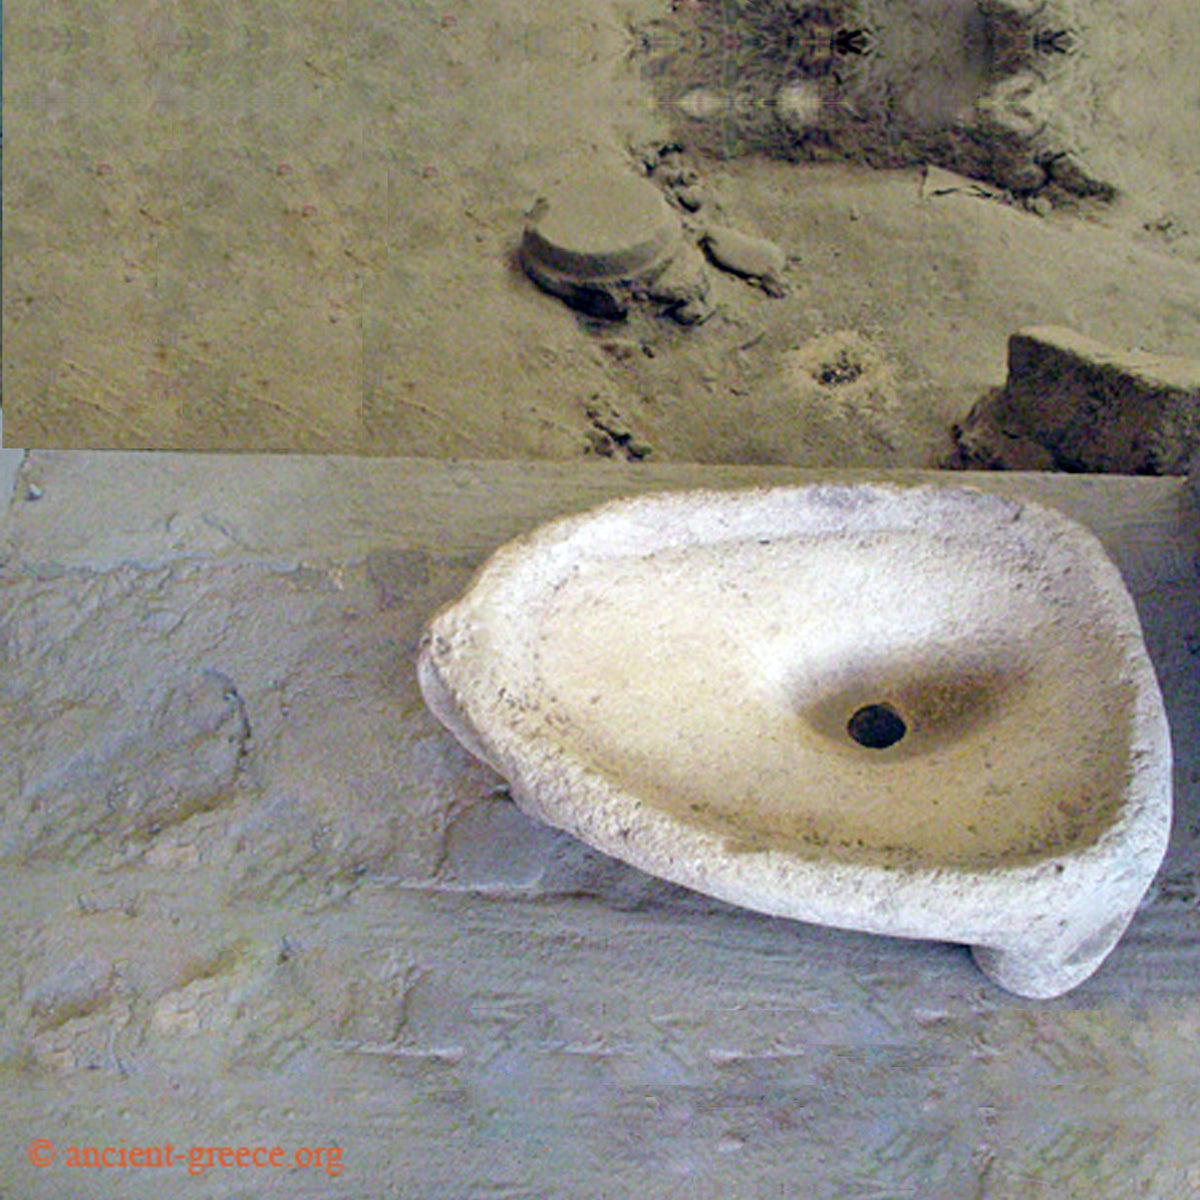 Antique Stone Sink from Akrotiti image 2 of 2